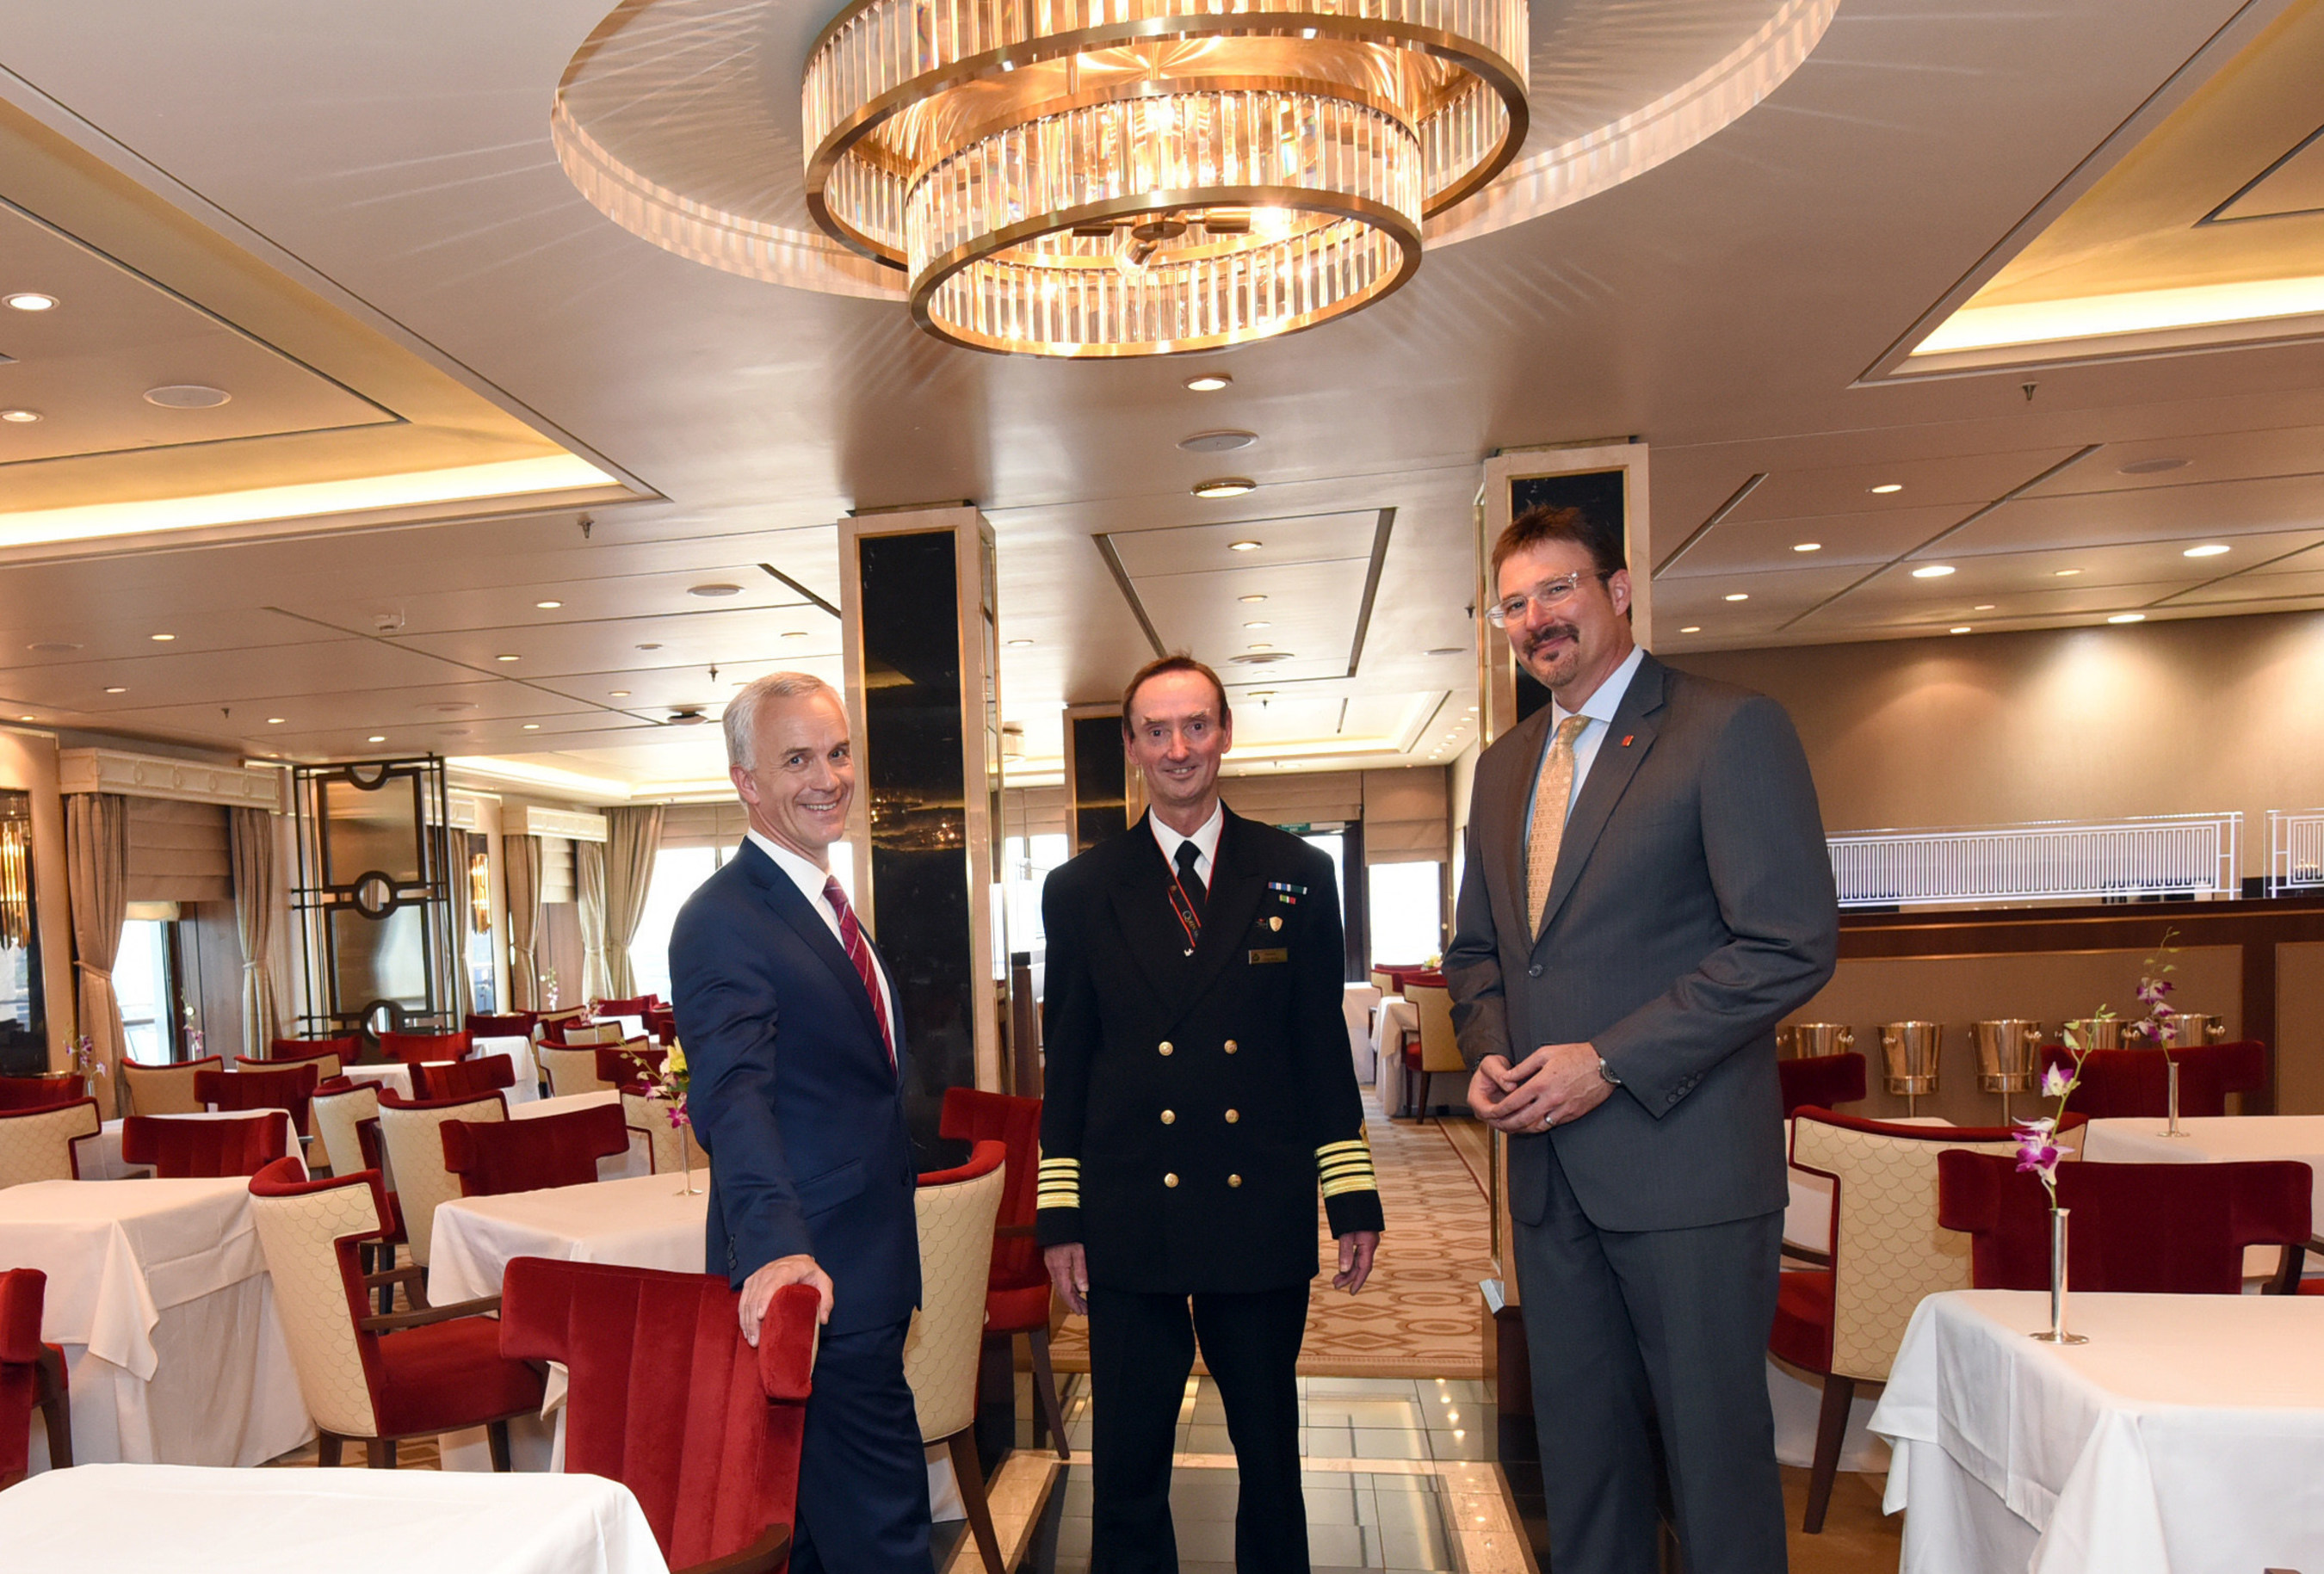 David Noyes, left, CEO, Cunard, Captain Christopher Wells, center, and Richard Meadows, right, President, Cunard, North America, pose for a photo in the Queens Grill restaurant aboard the remastered Queen Mary 2, Wednesday, July 6, 2016, at Brooklyn Cruise Terminal in New York, its U.S. homeport. The Queen Mary 2 spent 25 days in dry dock and a refit that cost in the region of $132 million, renovating its staterooms, restaurants and public areas. (Diane Bondareff/AP Images for Cunard)